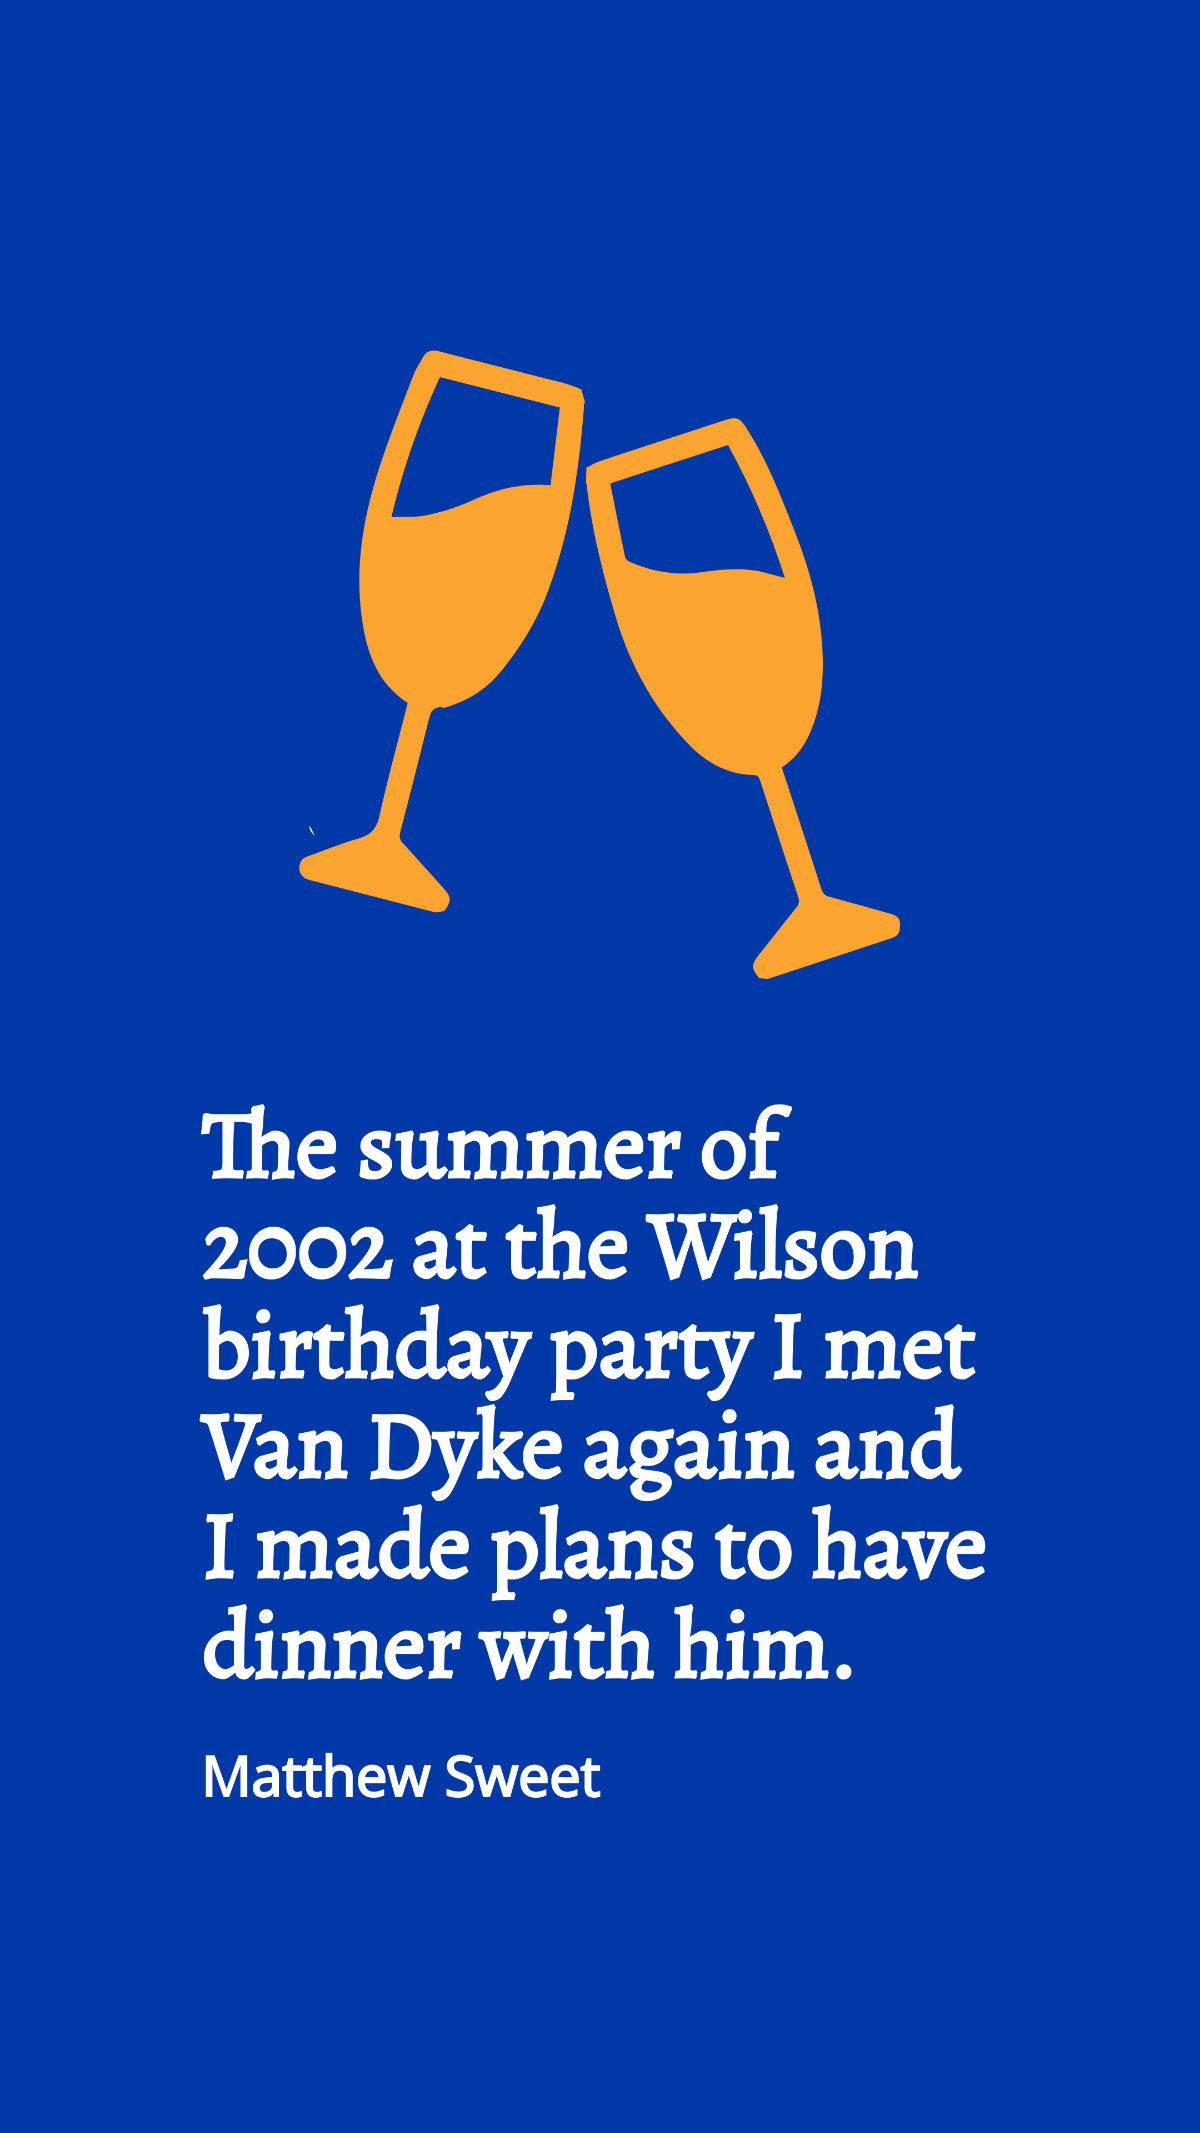 Matthew Sweet - The summer of 2002 at the Wilson birthday party I met Van Dyke again and I made plans to have dinner with him. Template